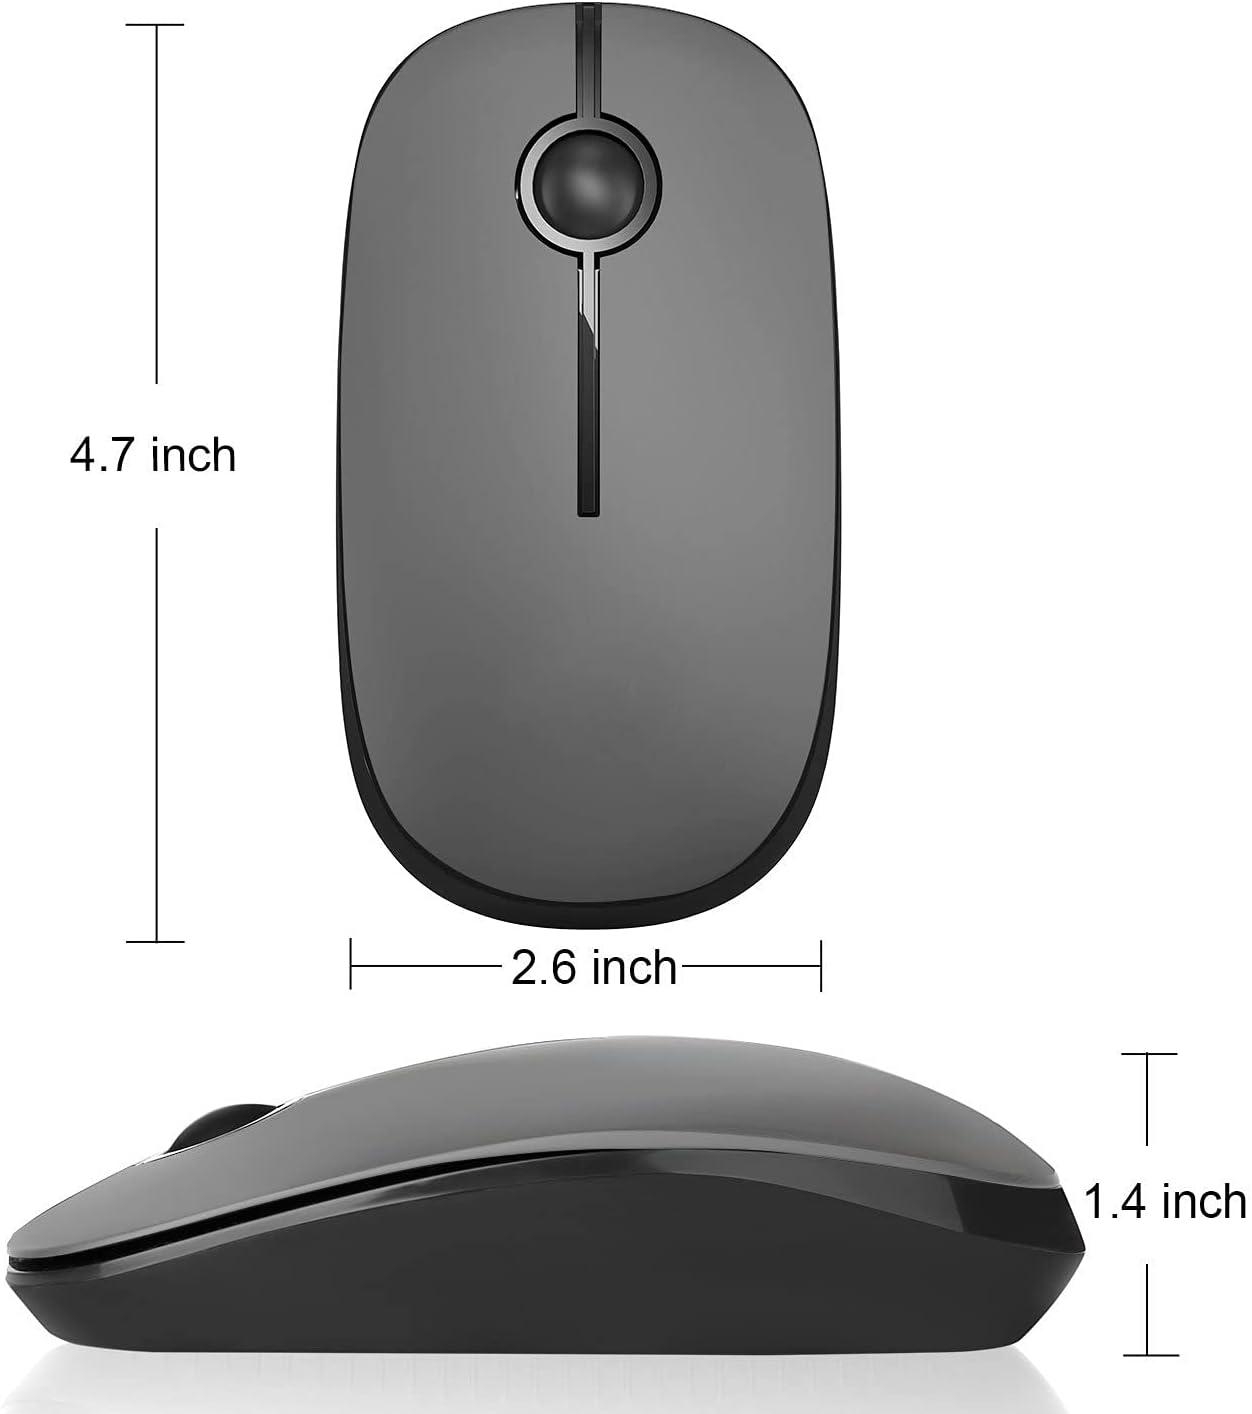 Unipows Wireless Mouse - 2.4G Slim Portable Computer Mouse with